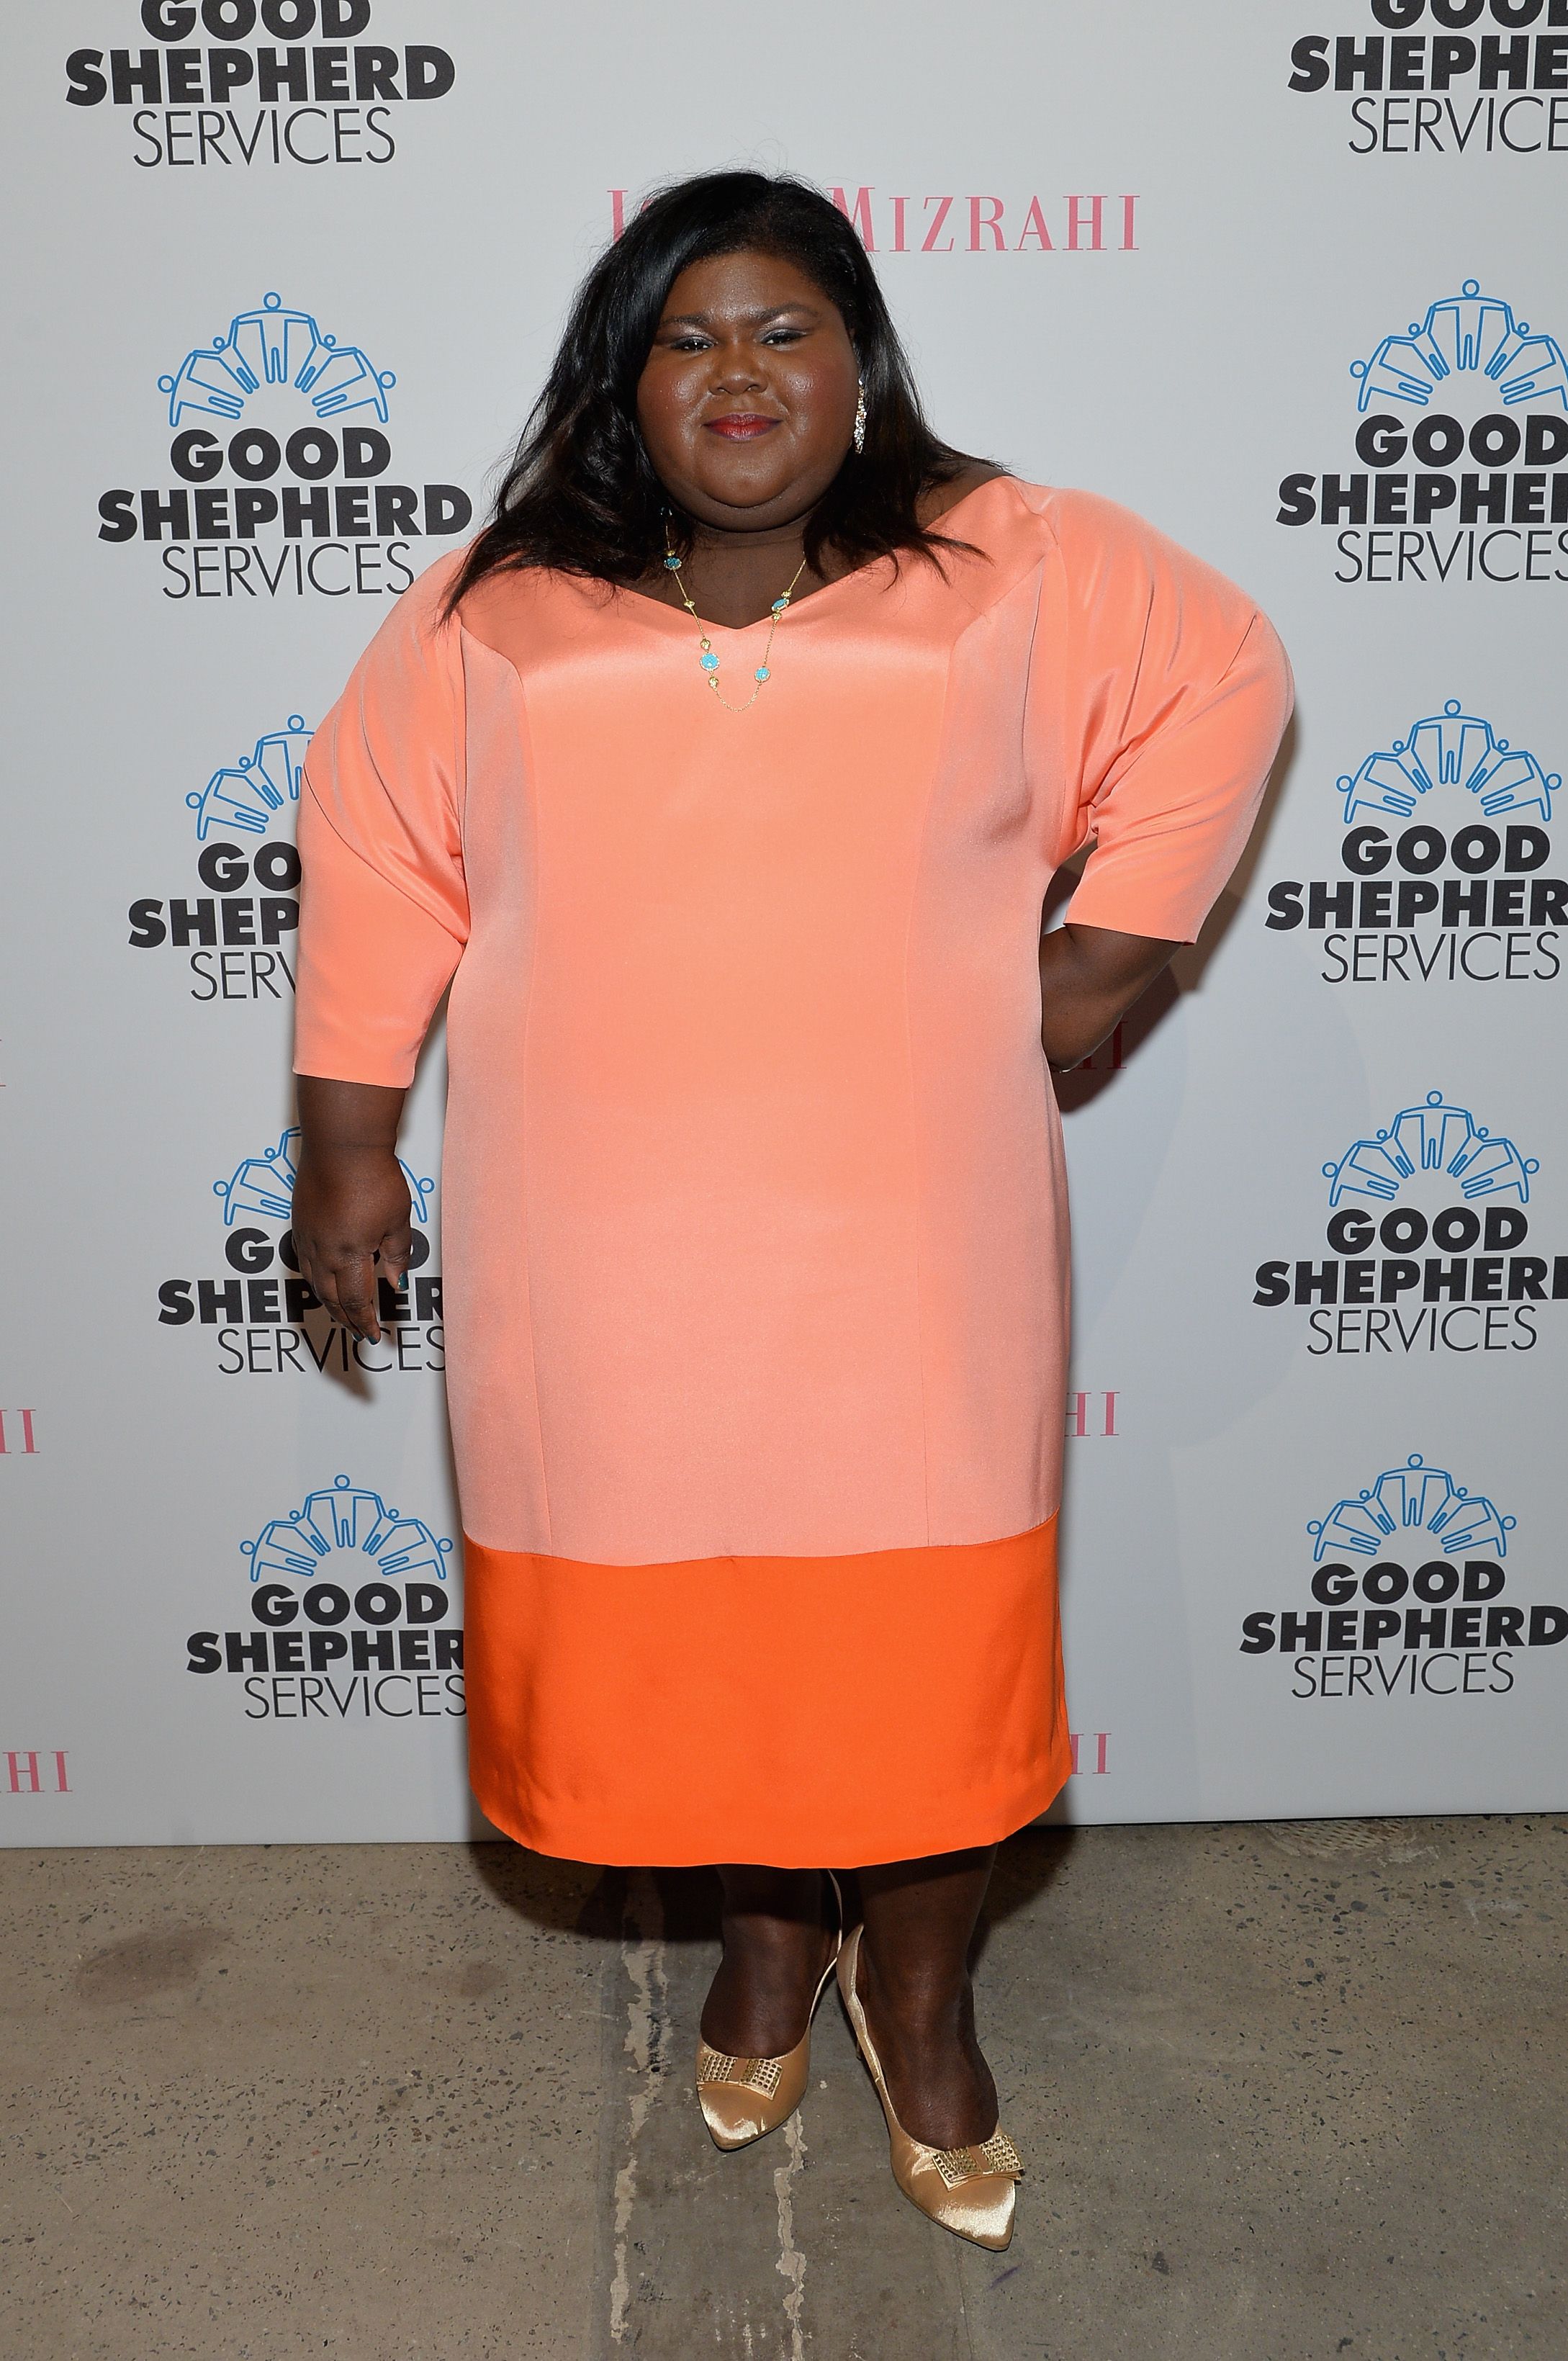 Gabourey Sidibe during the Good Shepherd Services Spring Party in New York City on April 24, 2014. | Source: Getty Images